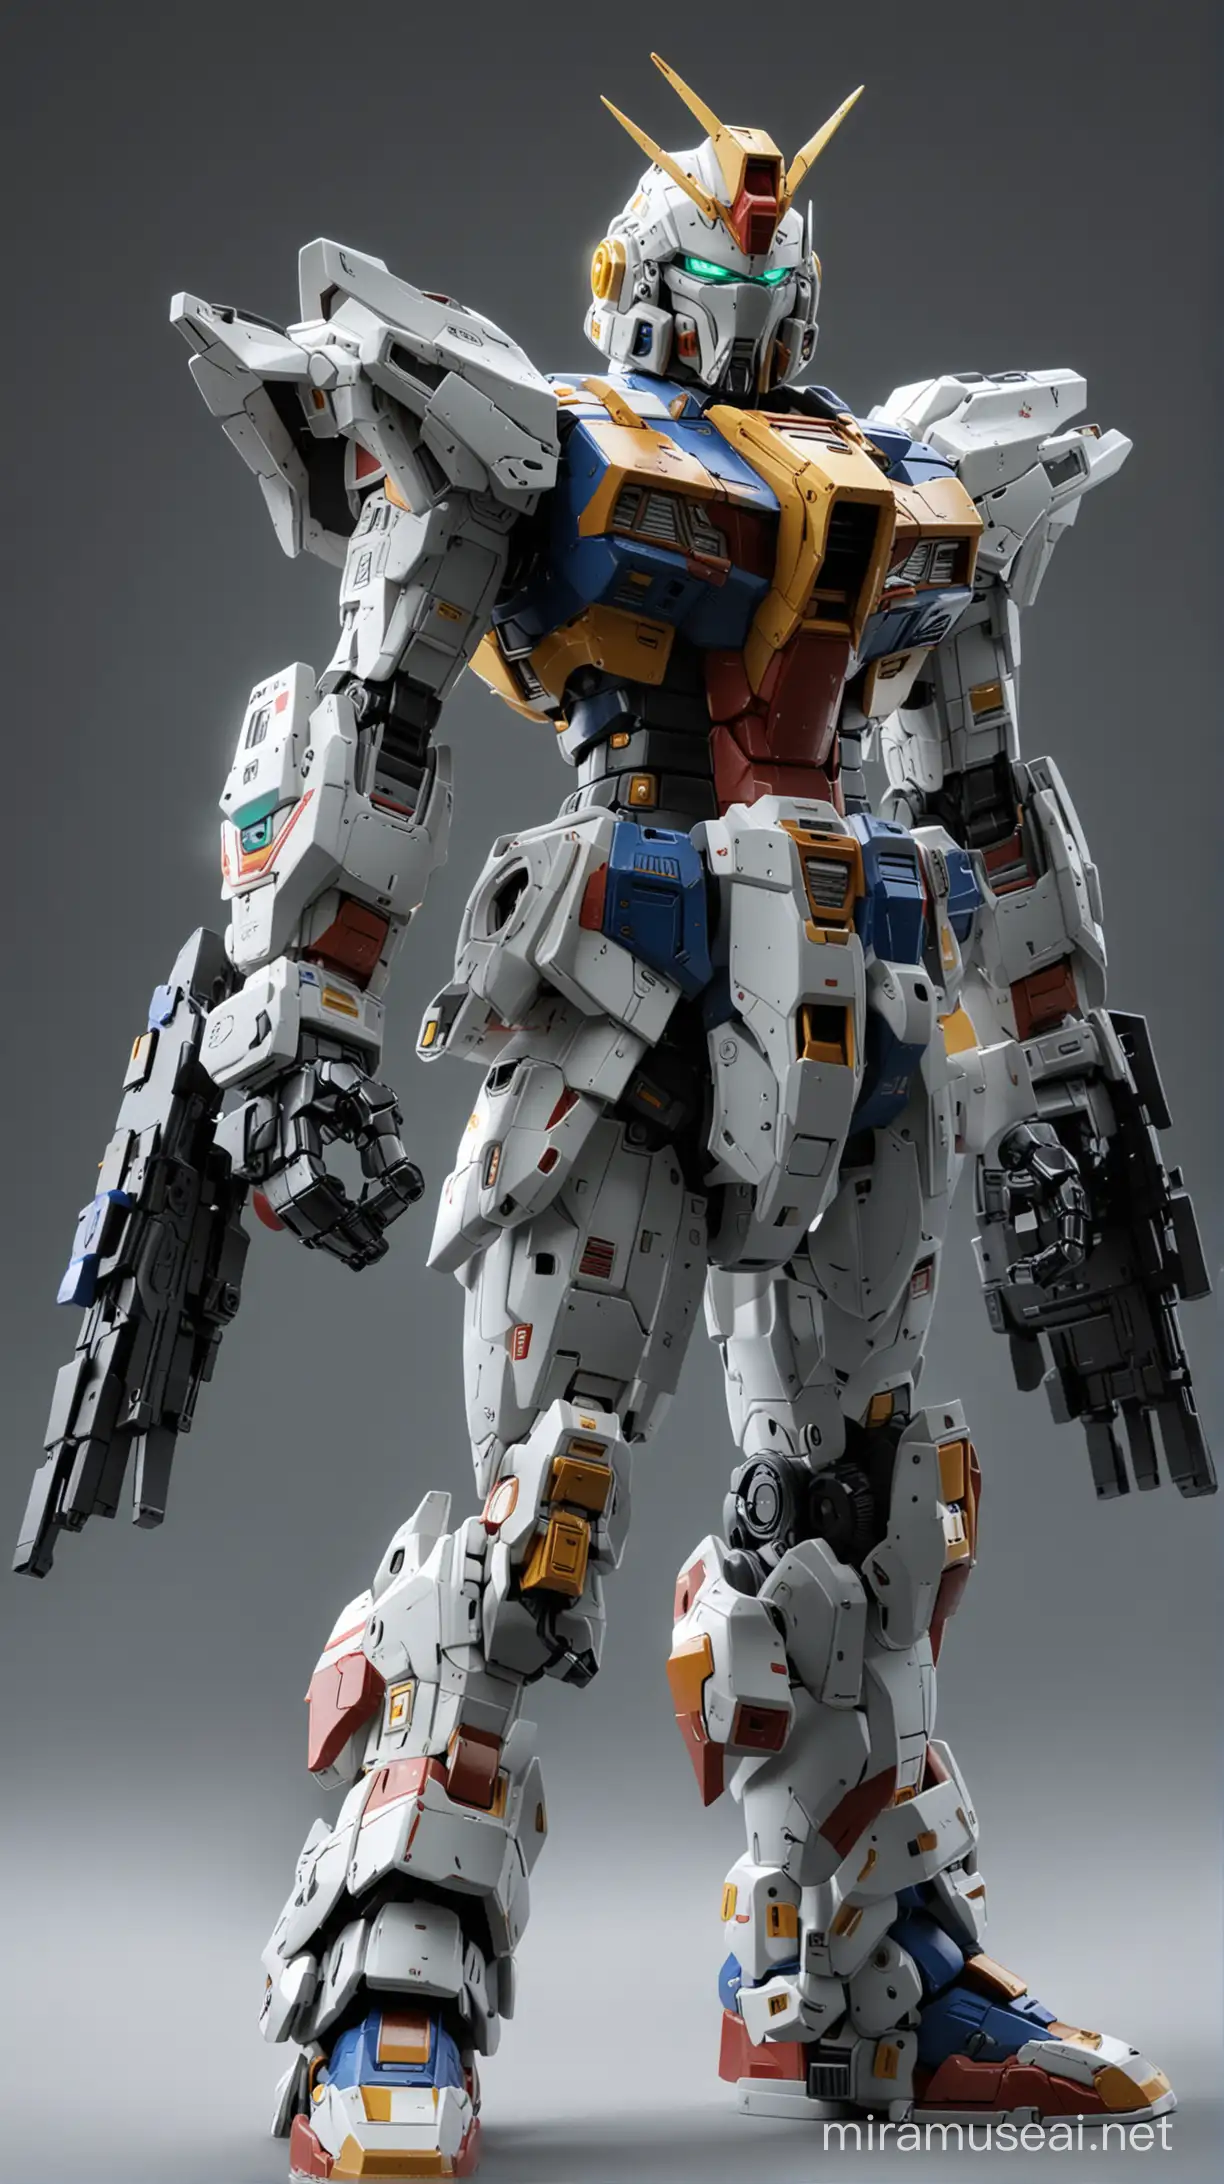 4D realistic caricature of an action figure Gundam with added light effects and shadows